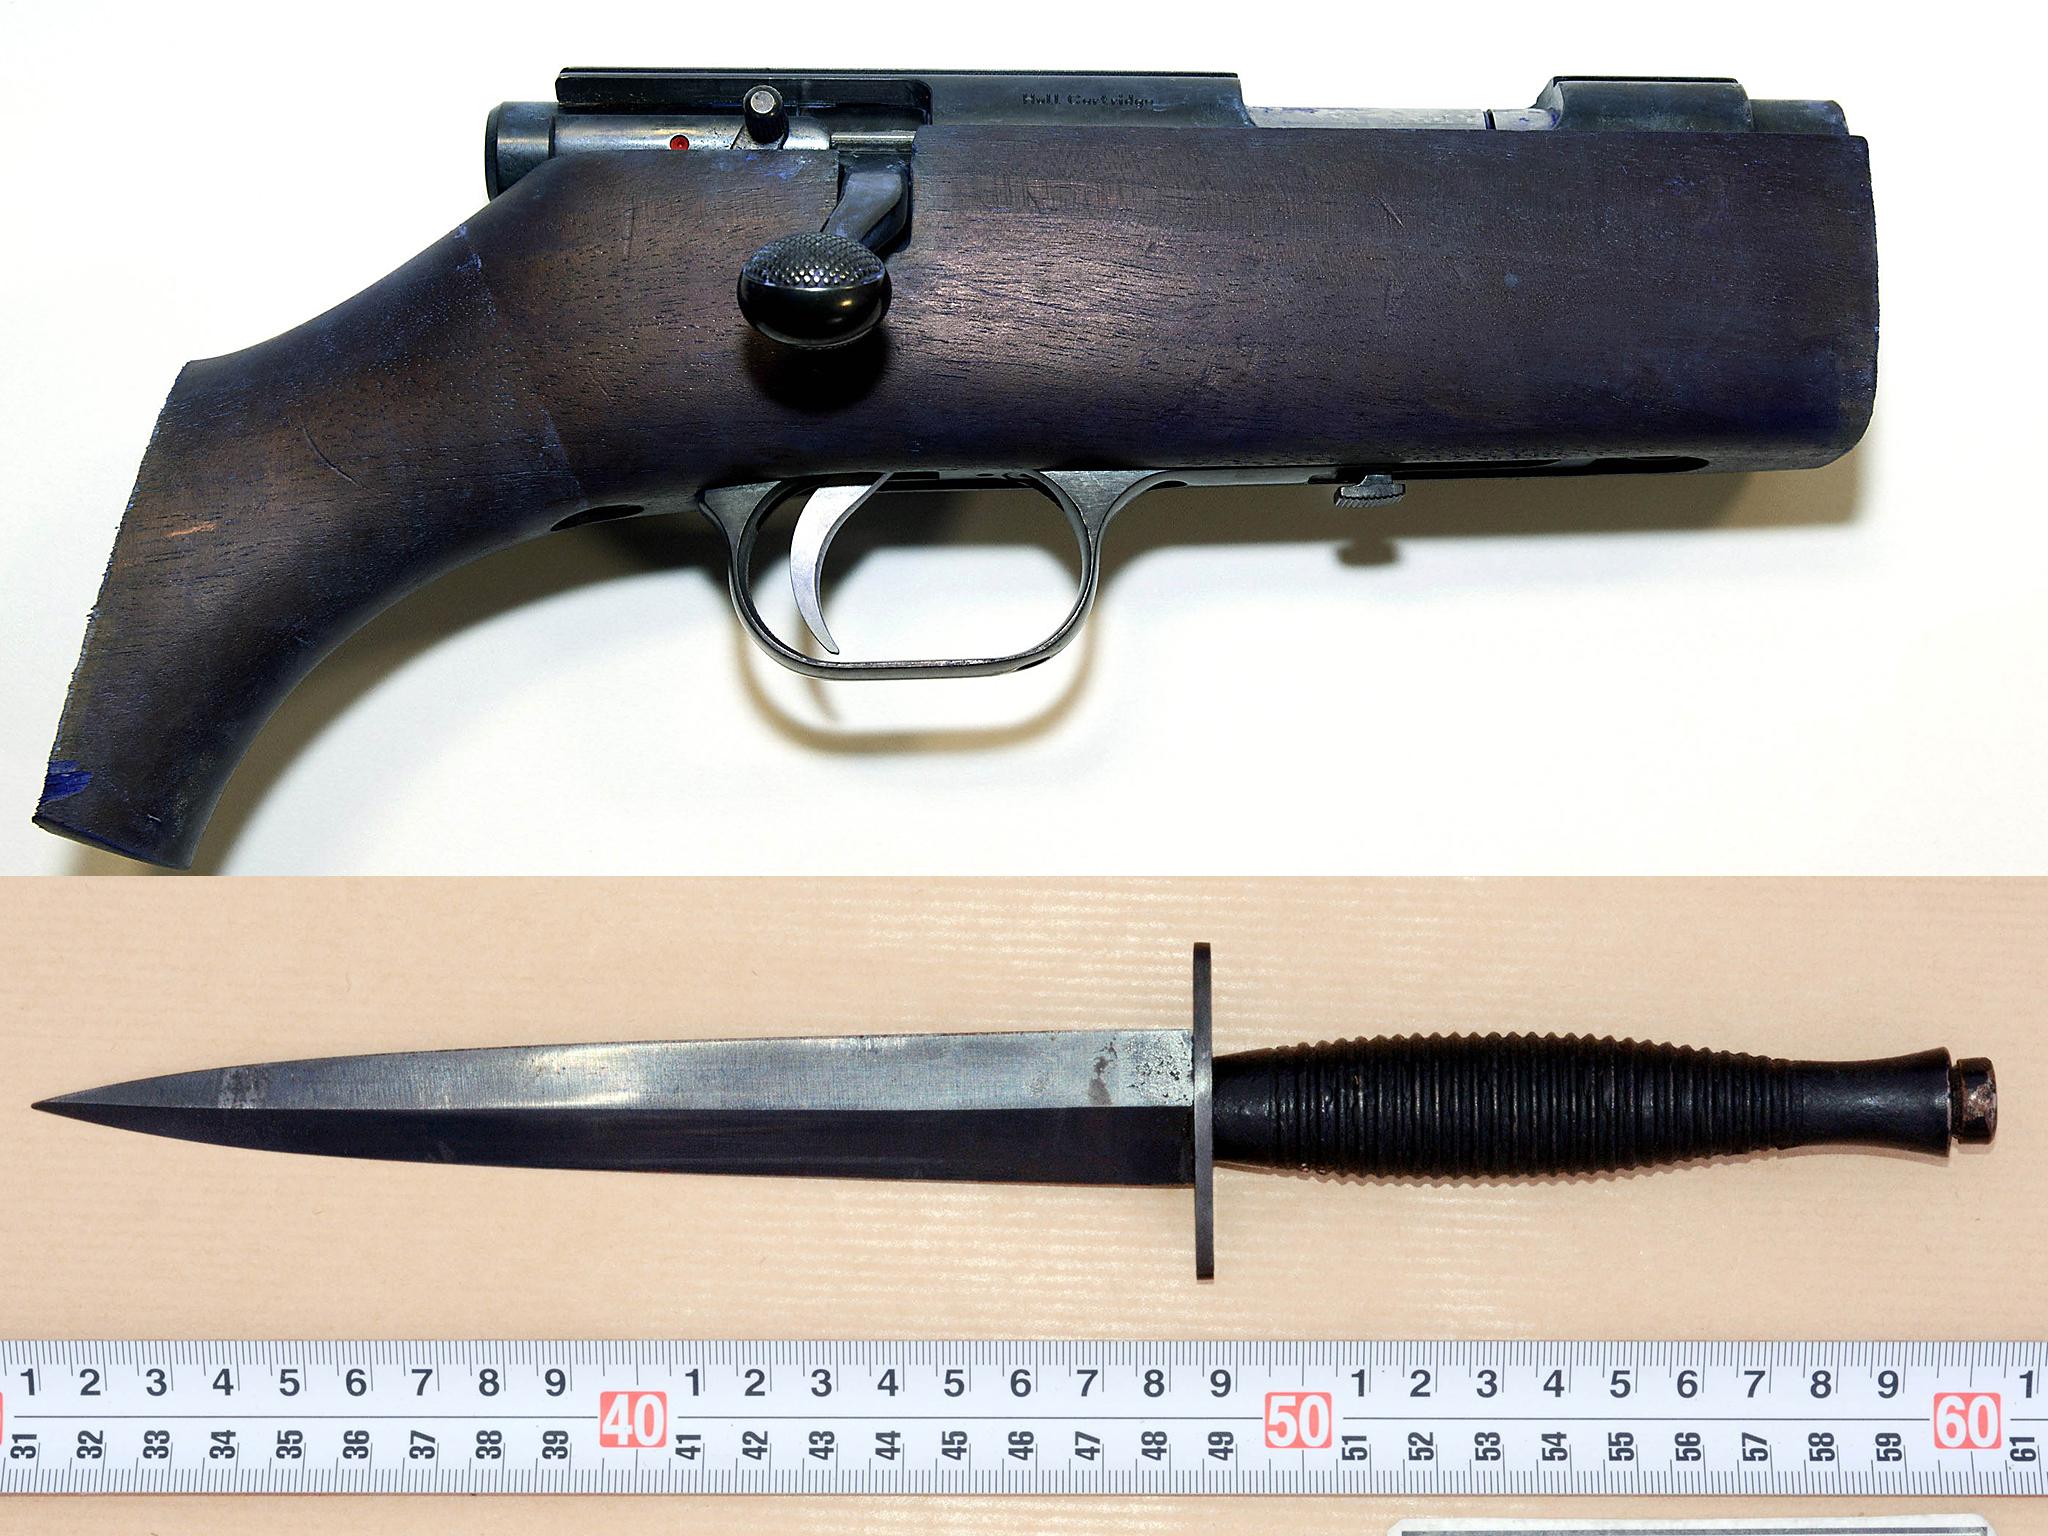 The weapons used by Thomas Mair to murder MP Jo Cox Rex